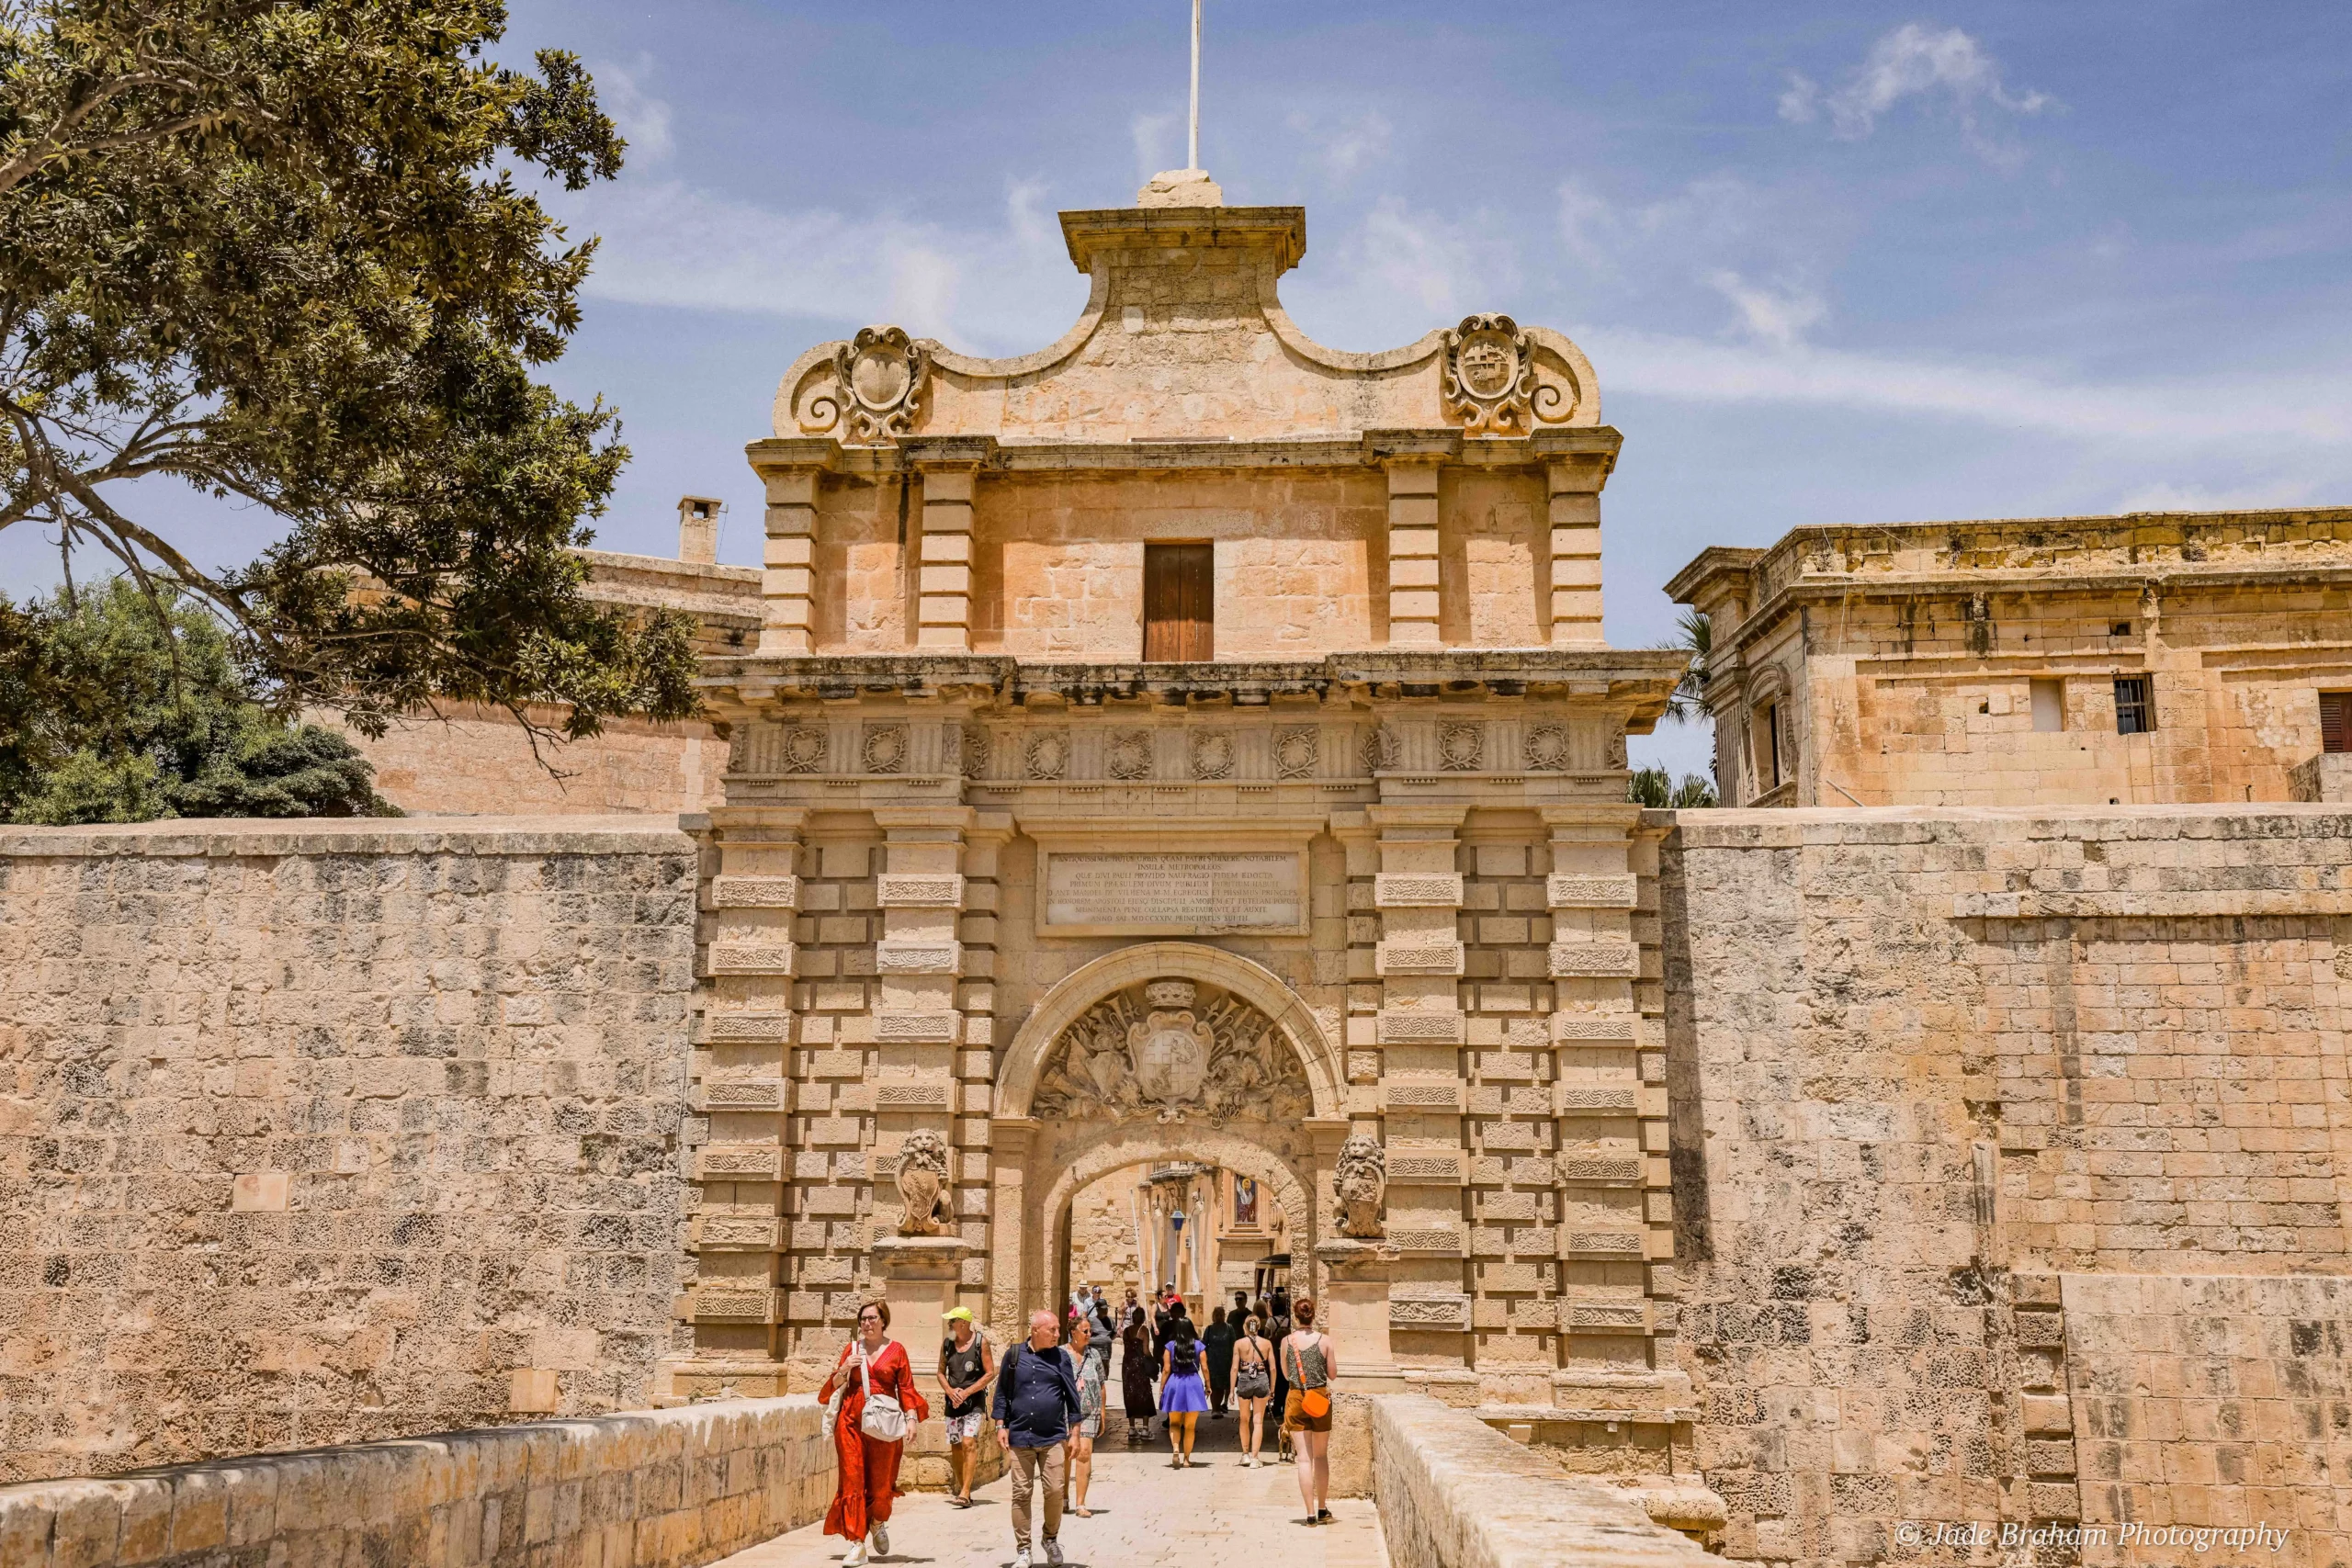 Mdina City Gate is the main entrance into the city and was used in the filiming of Game of Thrones.